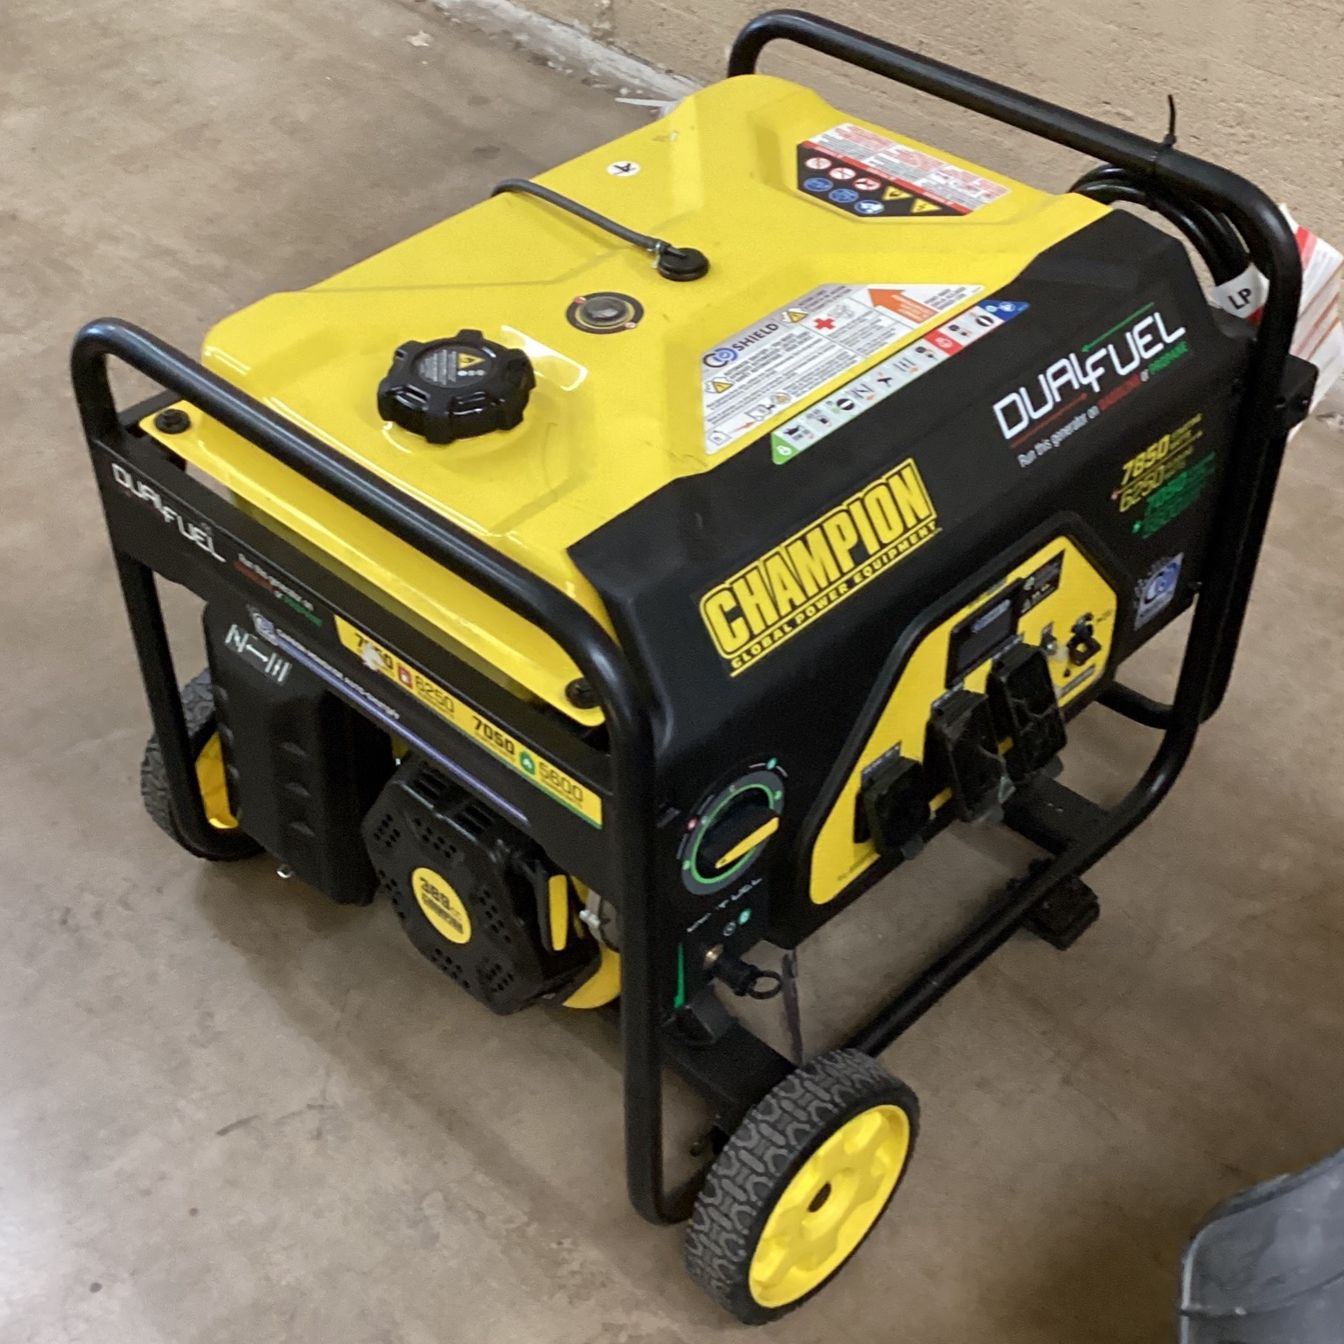 Champion 6250-Watt Gas and Propane Powered Dual-Fuel Portable Generator with CO Shield Technology (New)